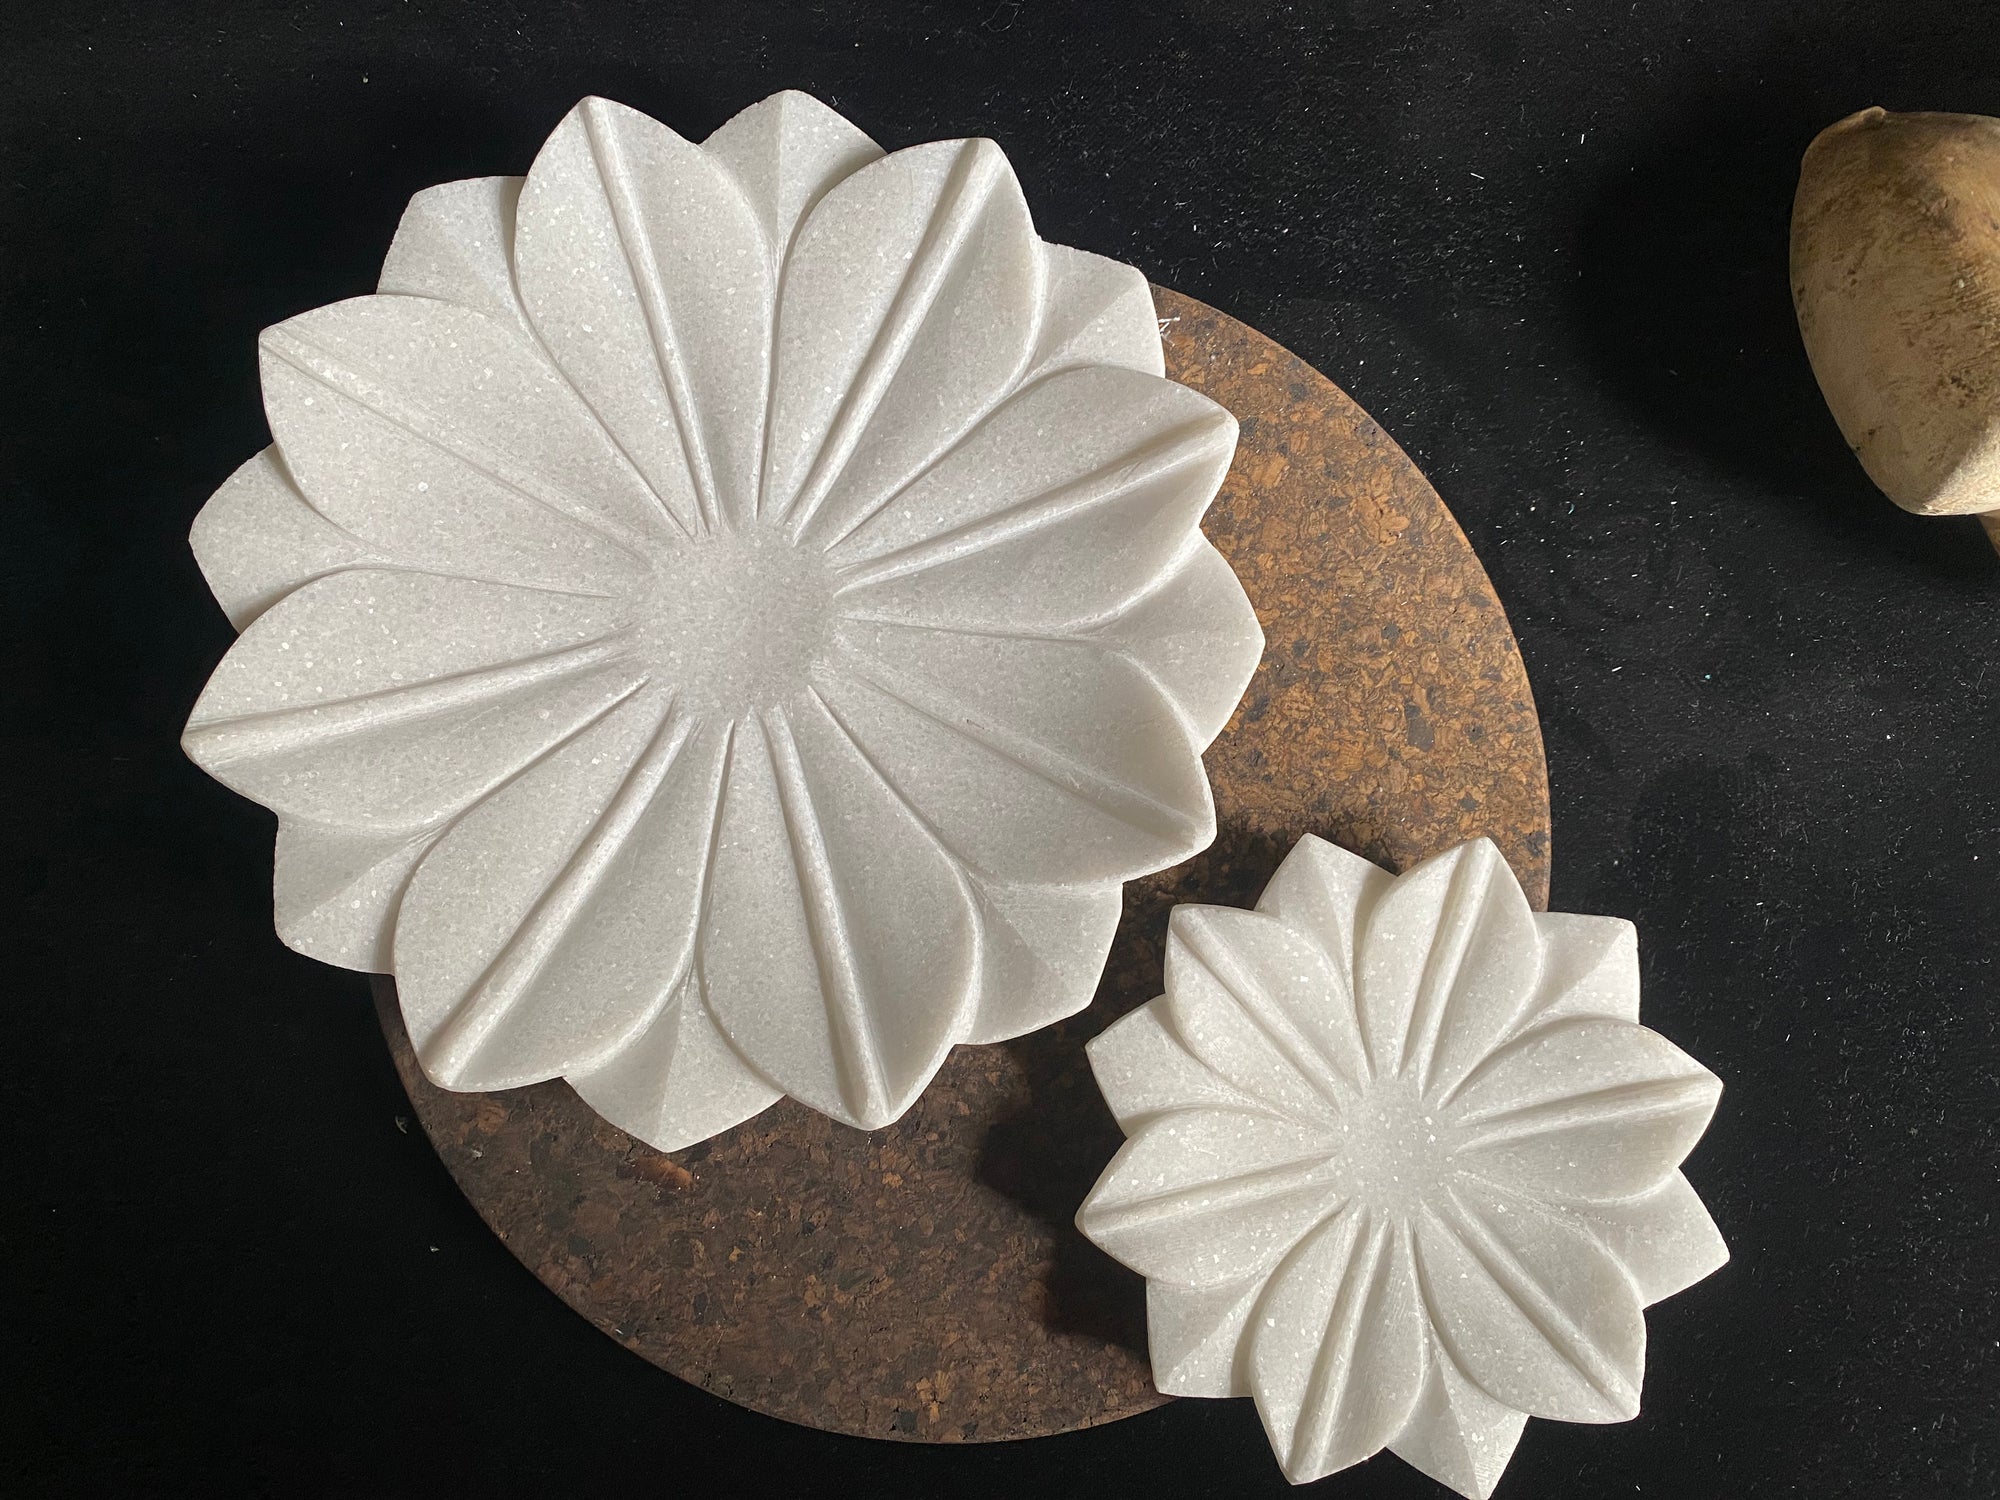 Hand crafted shallow bowls or plates, hand carved in Rajasthan from the finest local white marble in the form of an open lotus flower. Select from two sizes. Small 16 cm diameter, Large 26 cm diameter